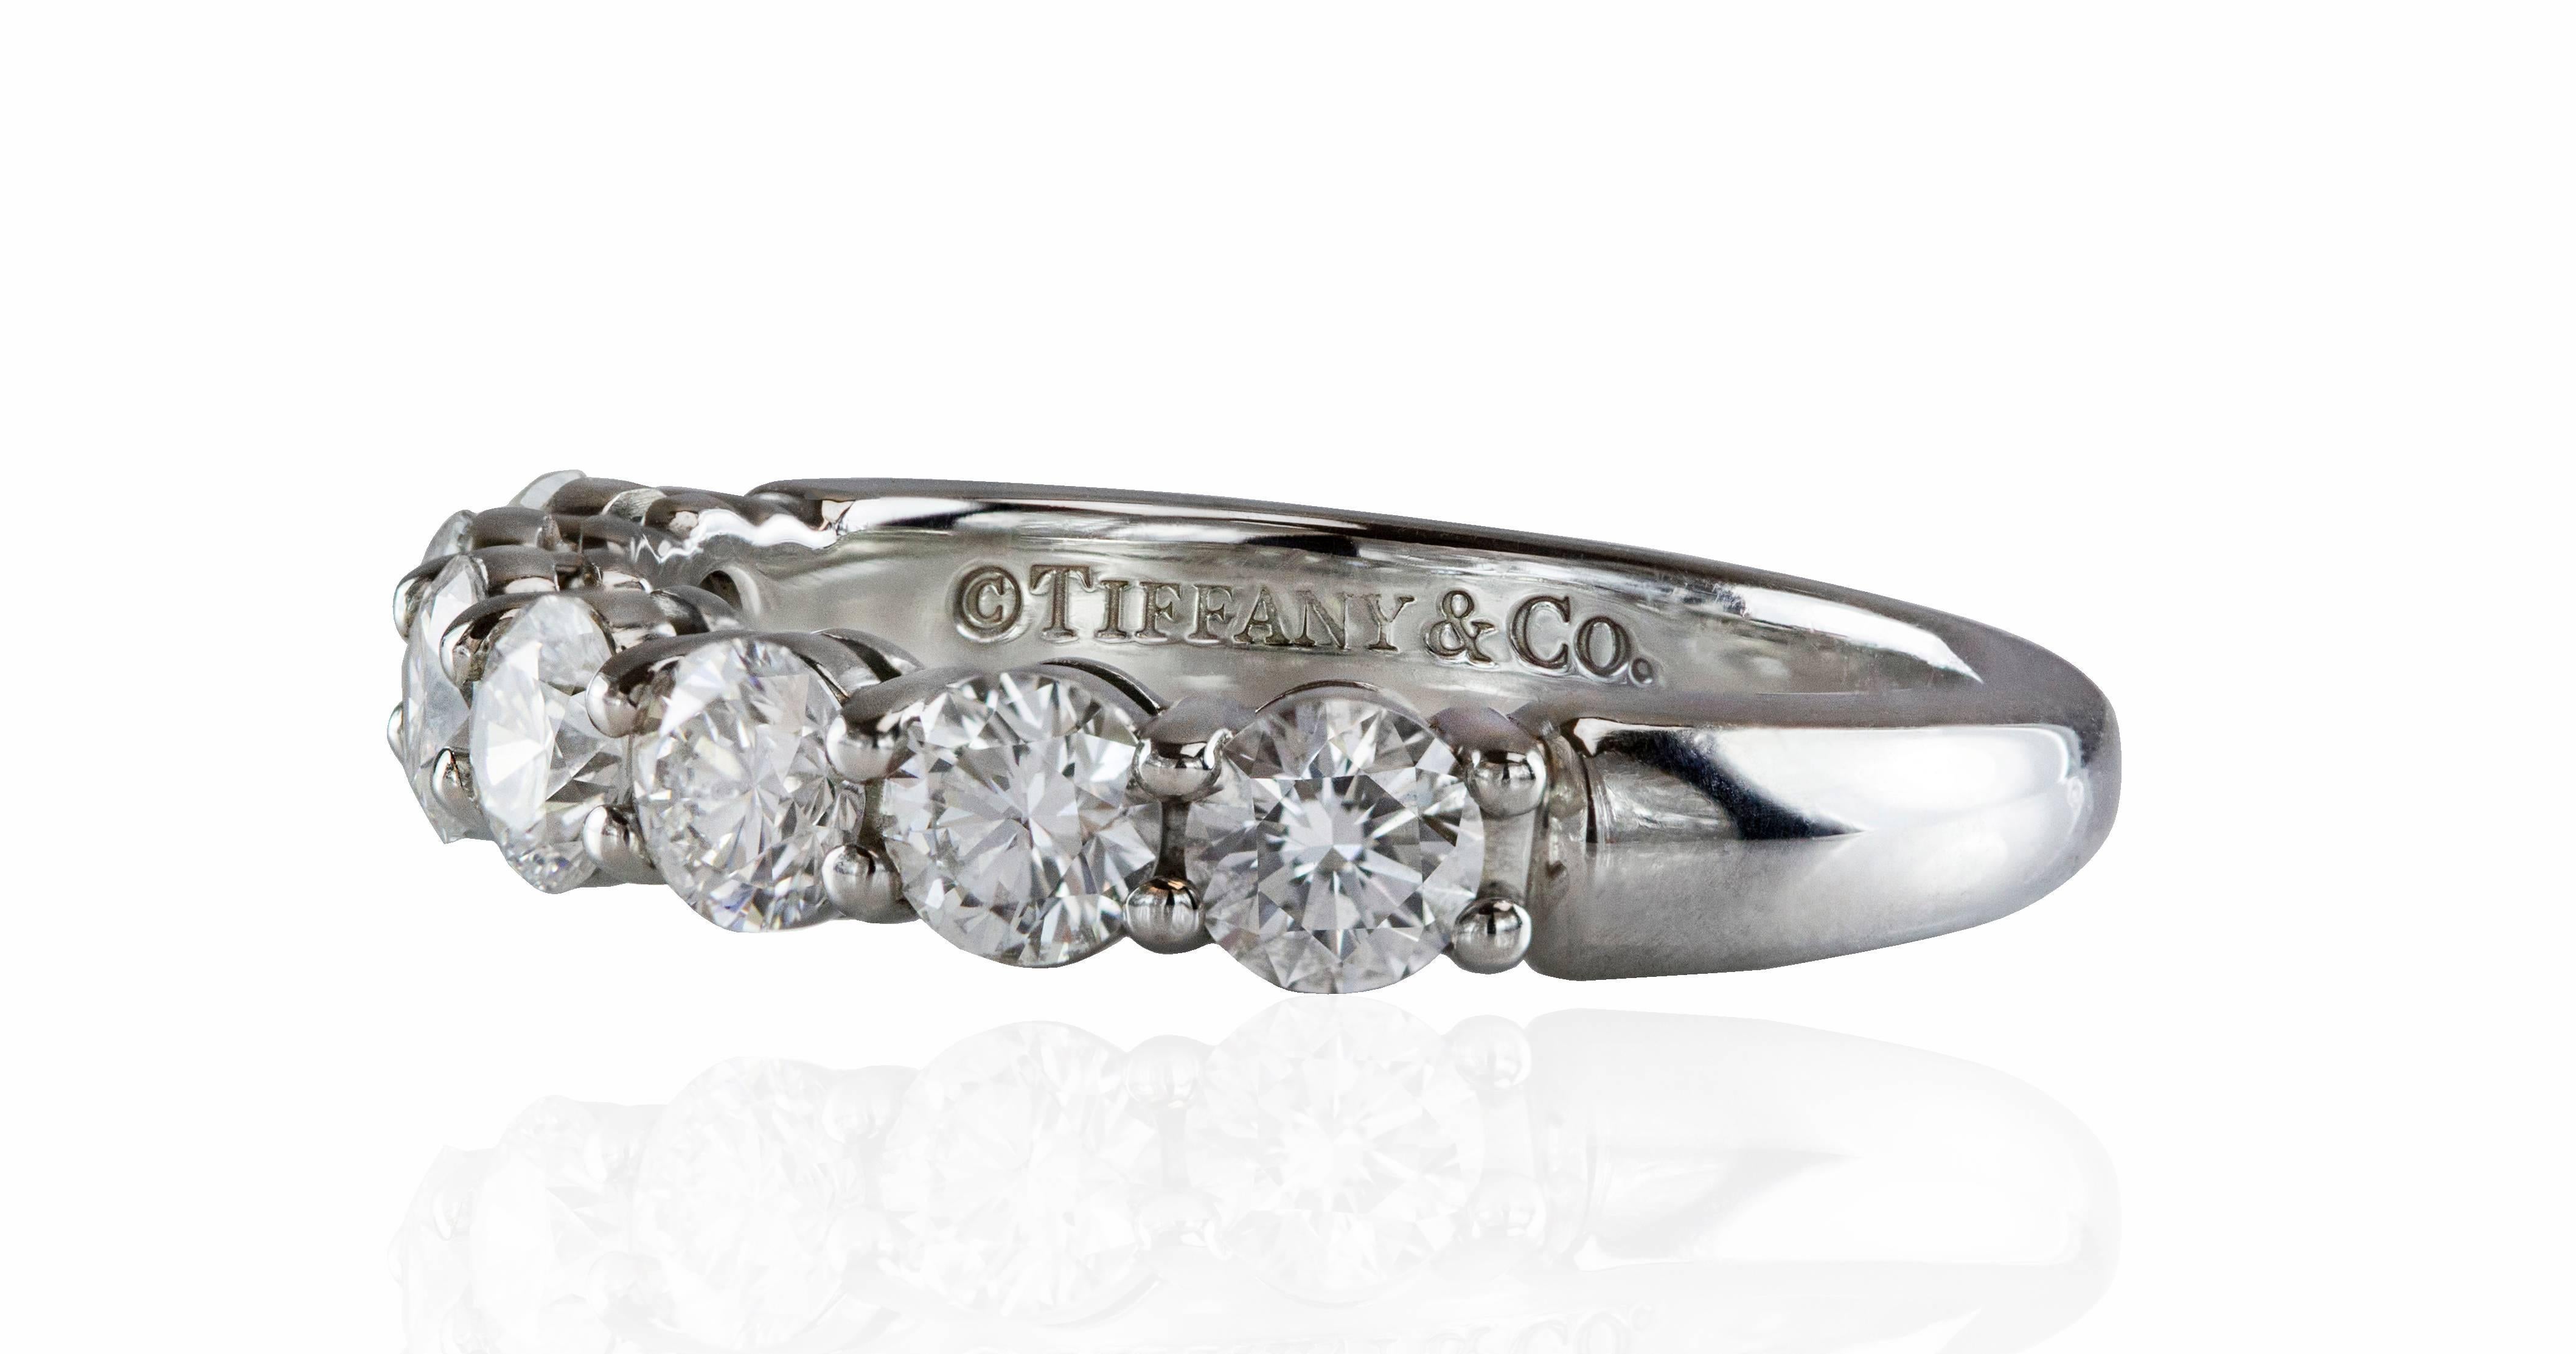 This ring features 7 brilliant round diamonds weighing 0.91 carats total. The ring is made in platinum. Made and signed by Tiffany & Co. Size 5 (sizable). 